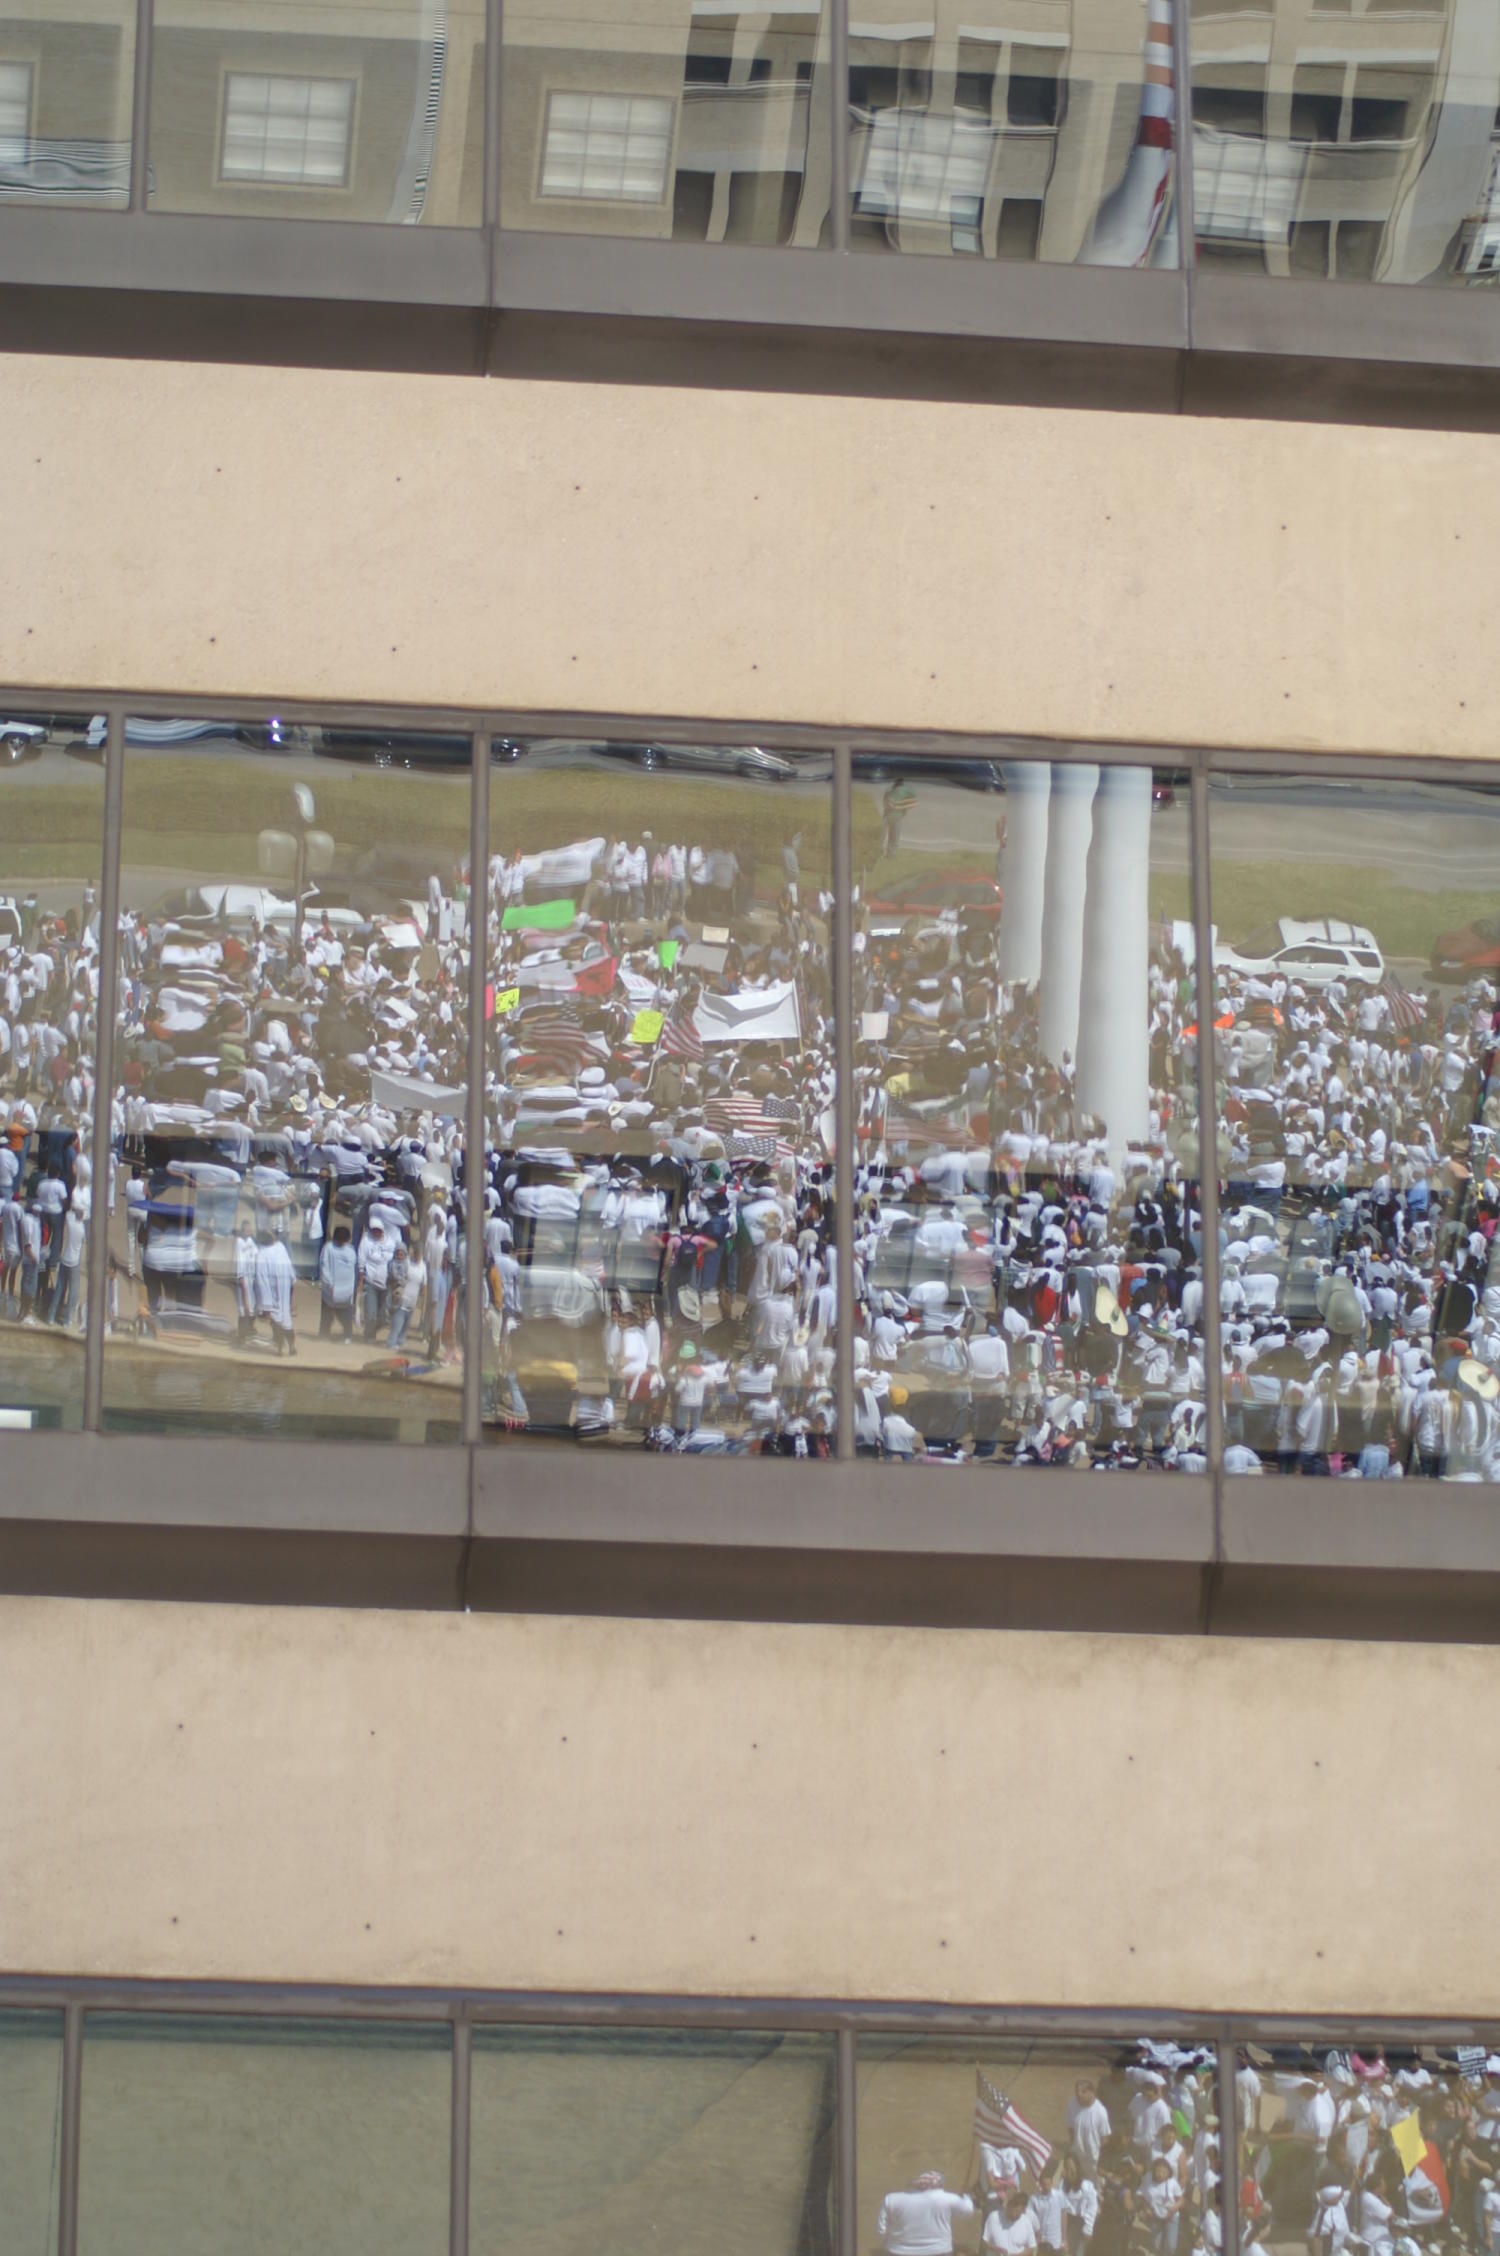 [Protesters are reflected in windows]
                                                
                                                    [Sequence #]: 1 of 1
                                                